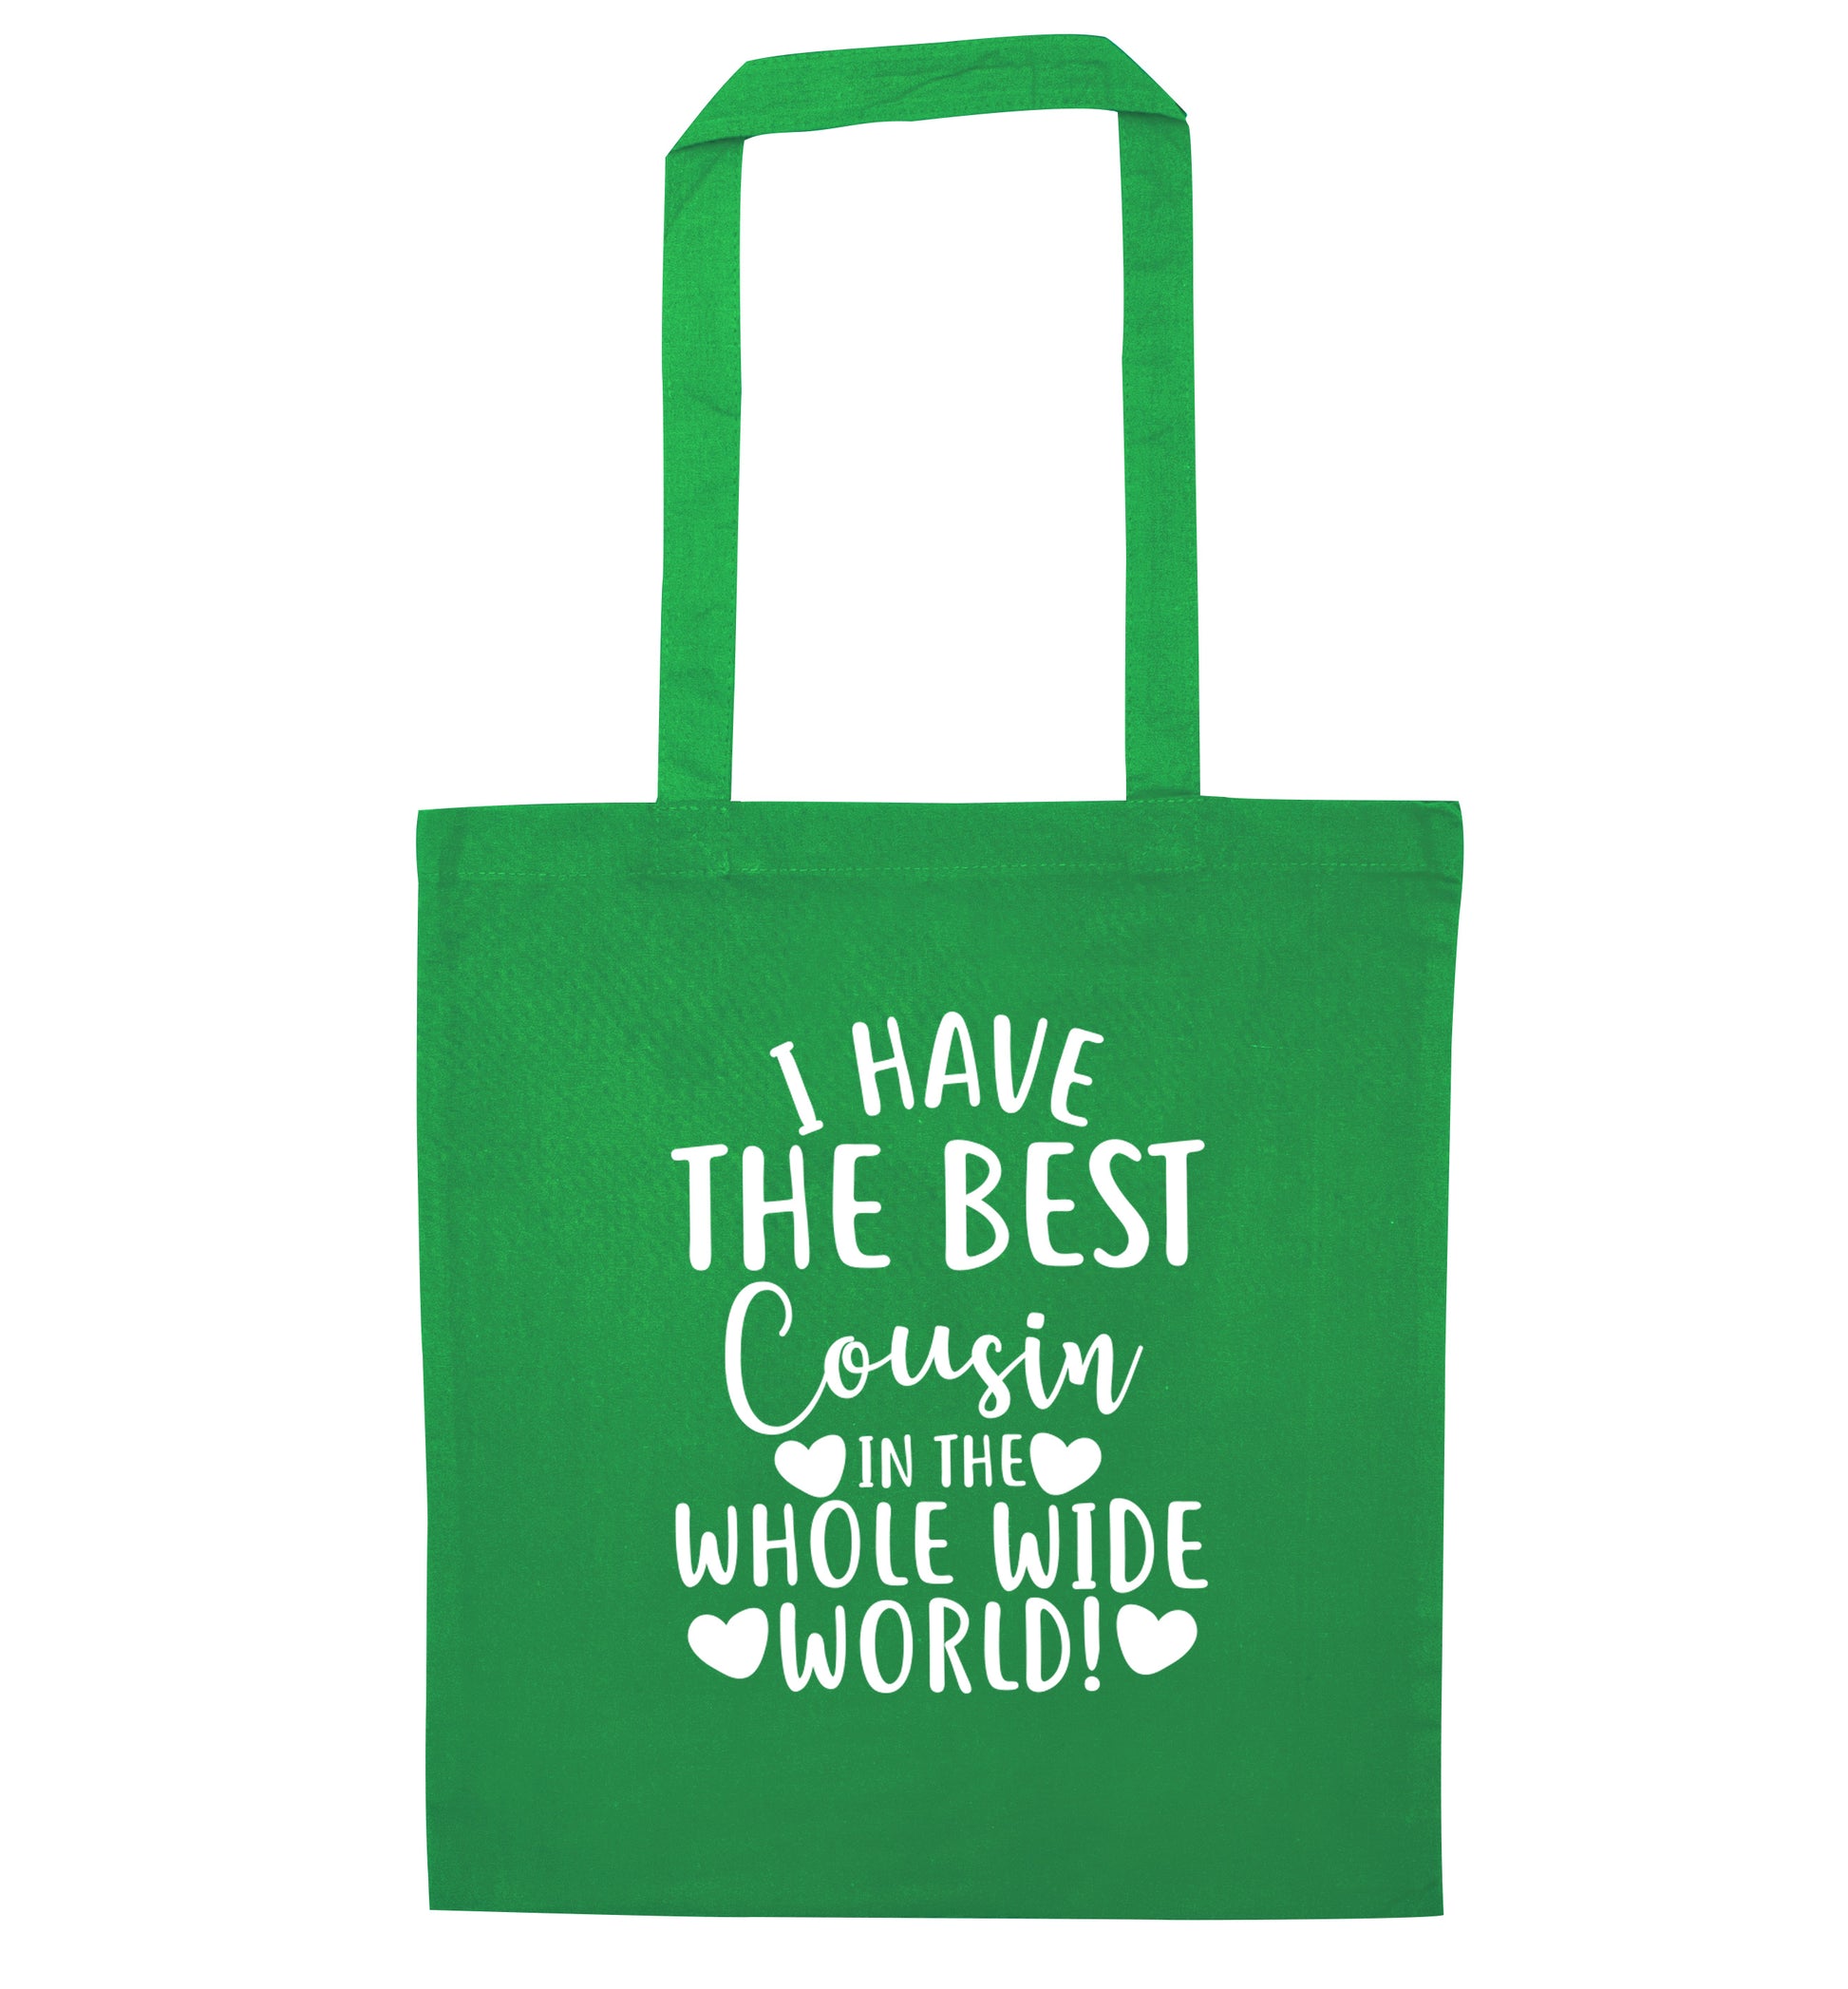 I have the best cousin in the whole wide world! green tote bag